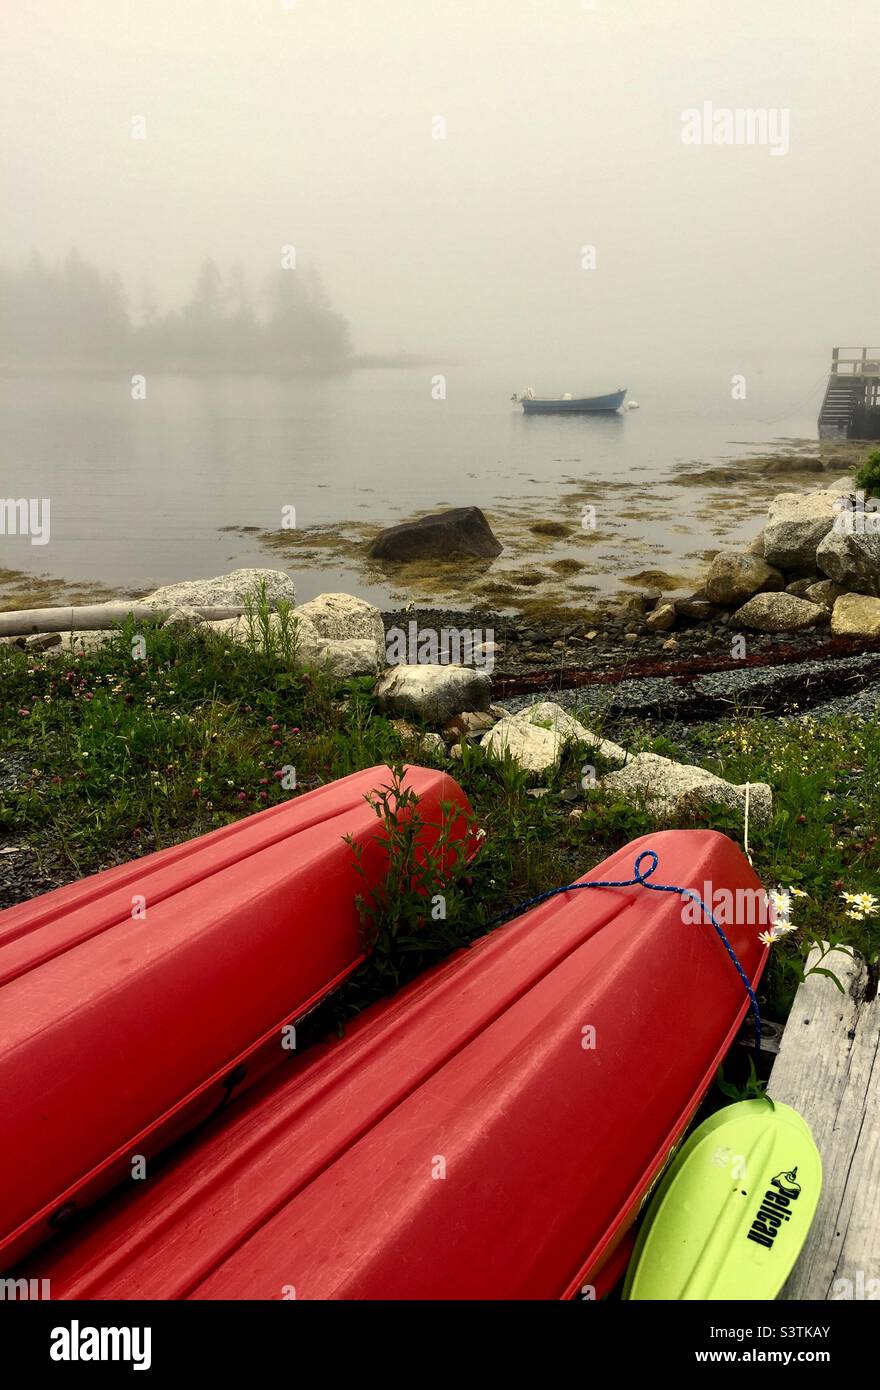 Fog rolls in. Kayaks on the shore, boat in the water. A sheltered cove in the Atlantic Ocean, Halifax, Canada. Stock Photo